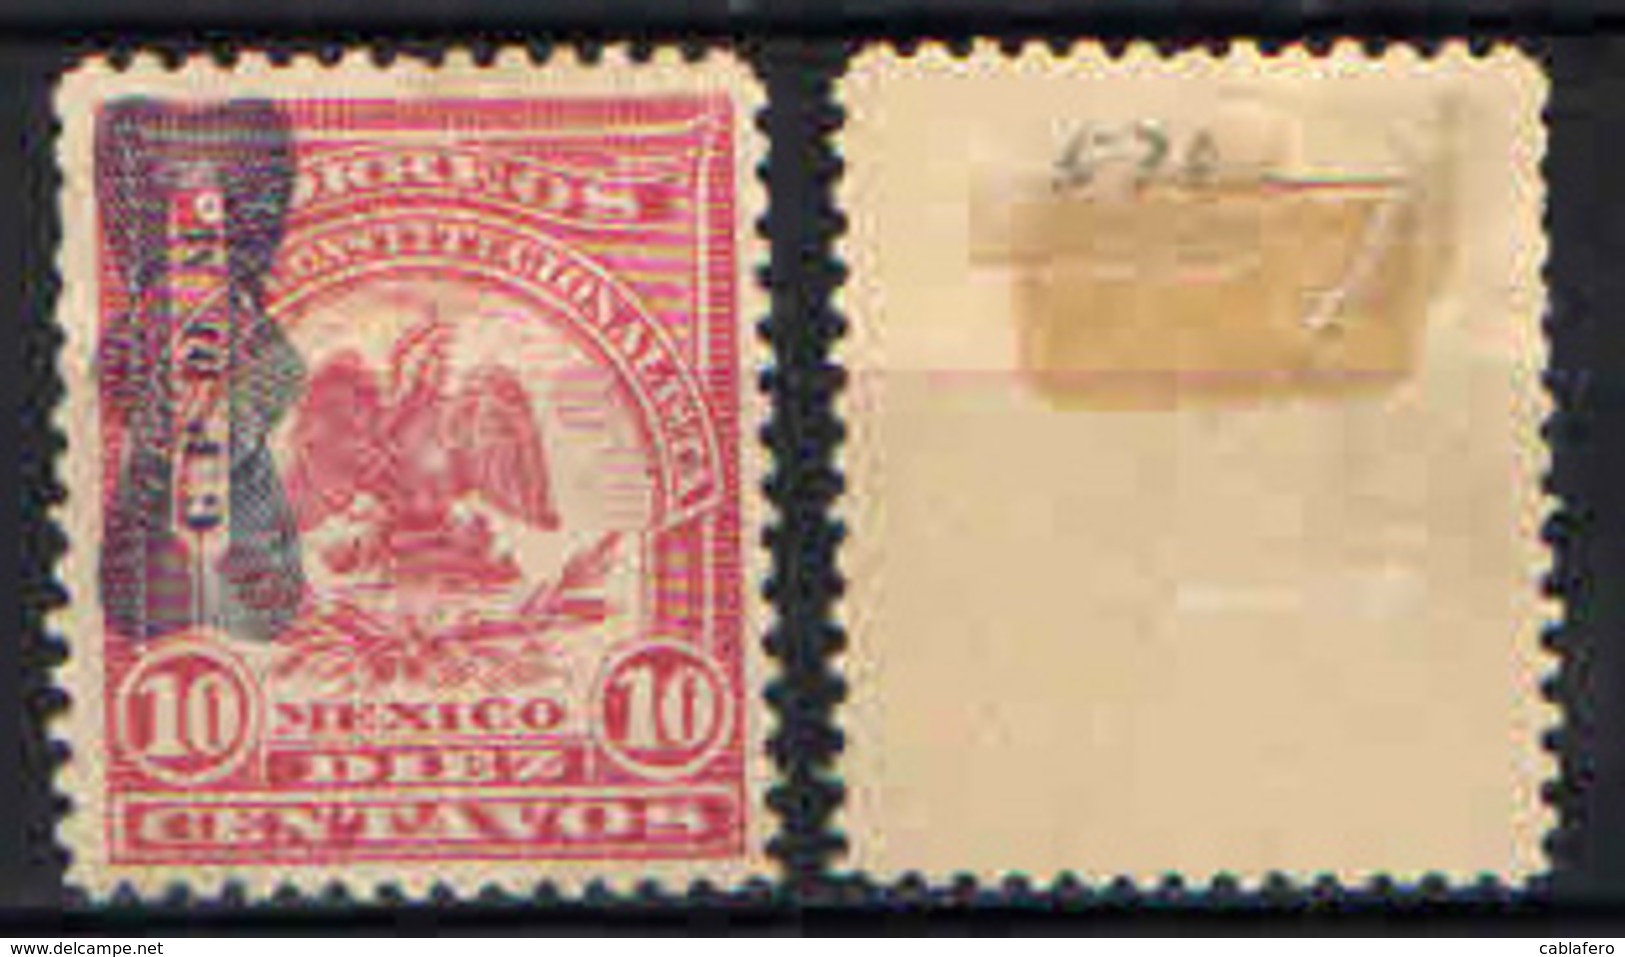 MESSICO - 1916 - Coat Of Arms - OVERPRINTED - MH - Messico